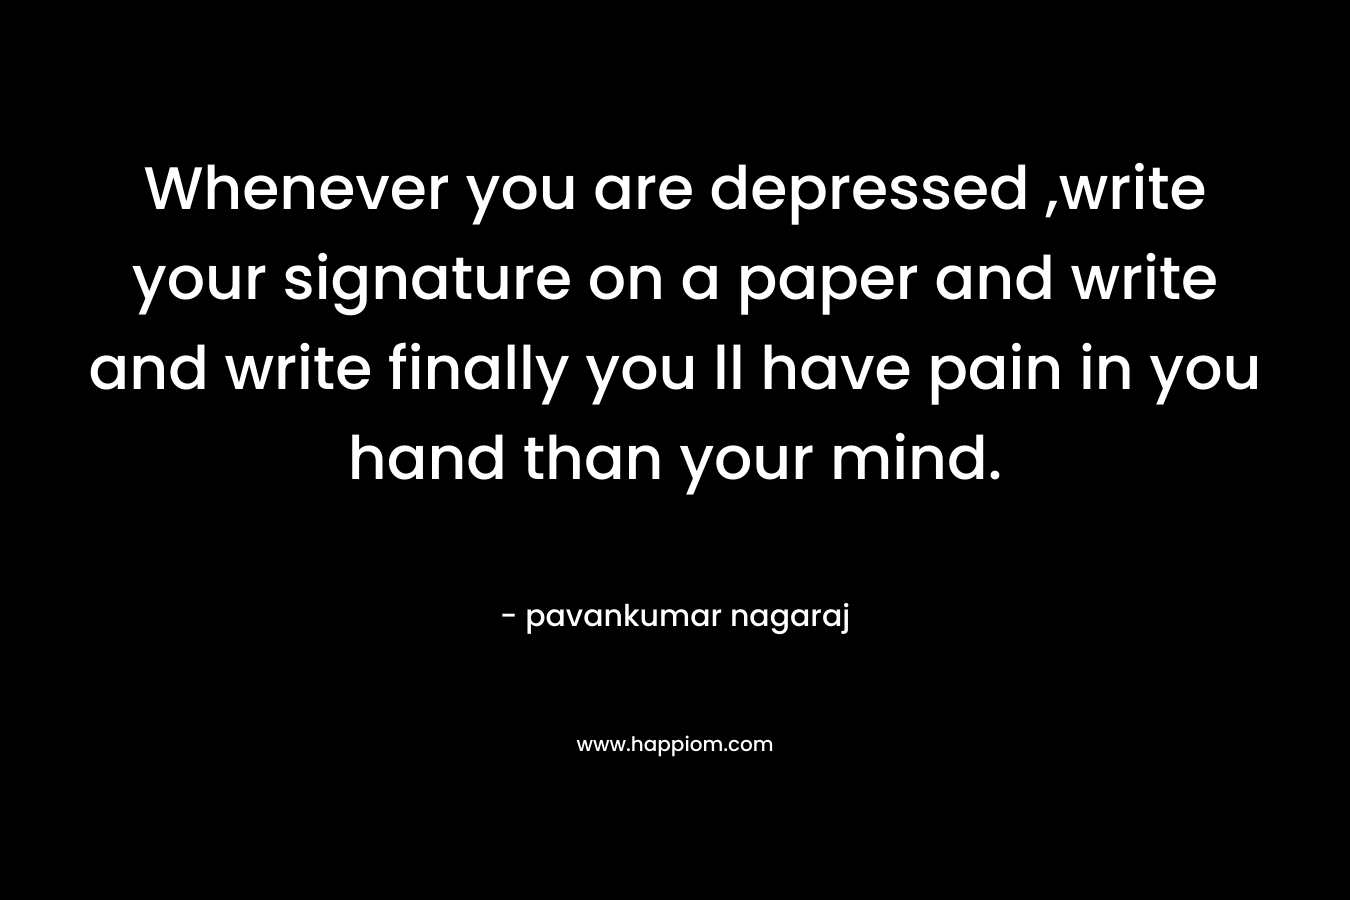 Whenever you are depressed ,write your signature on a paper and write and write finally you ll have pain in you hand than your mind.